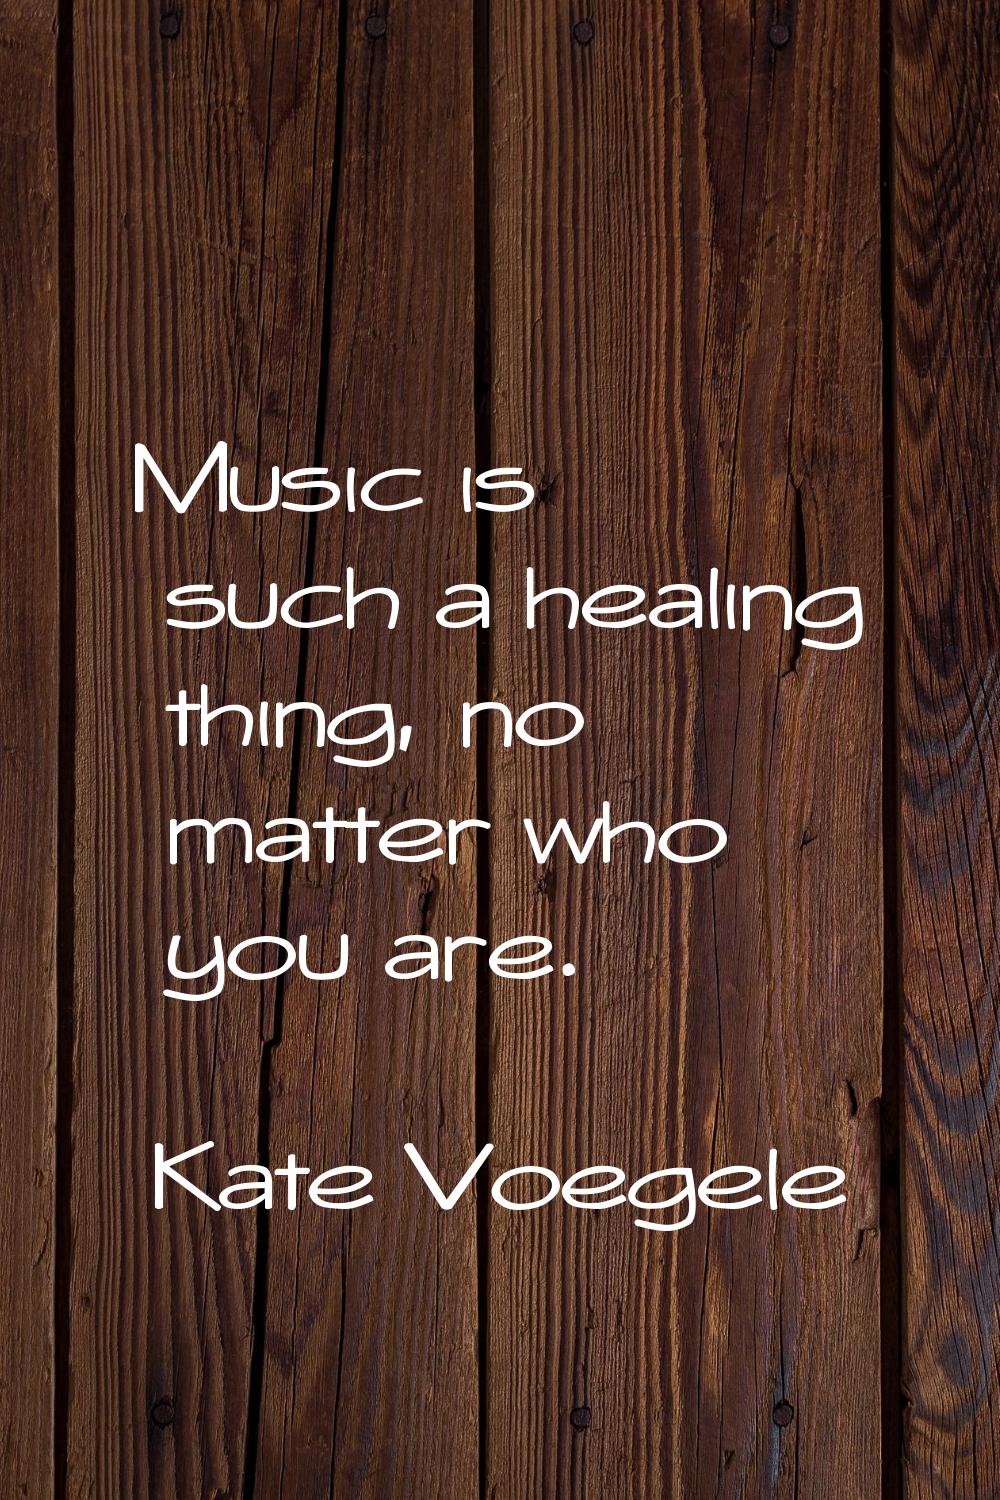 Music is such a healing thing, no matter who you are.